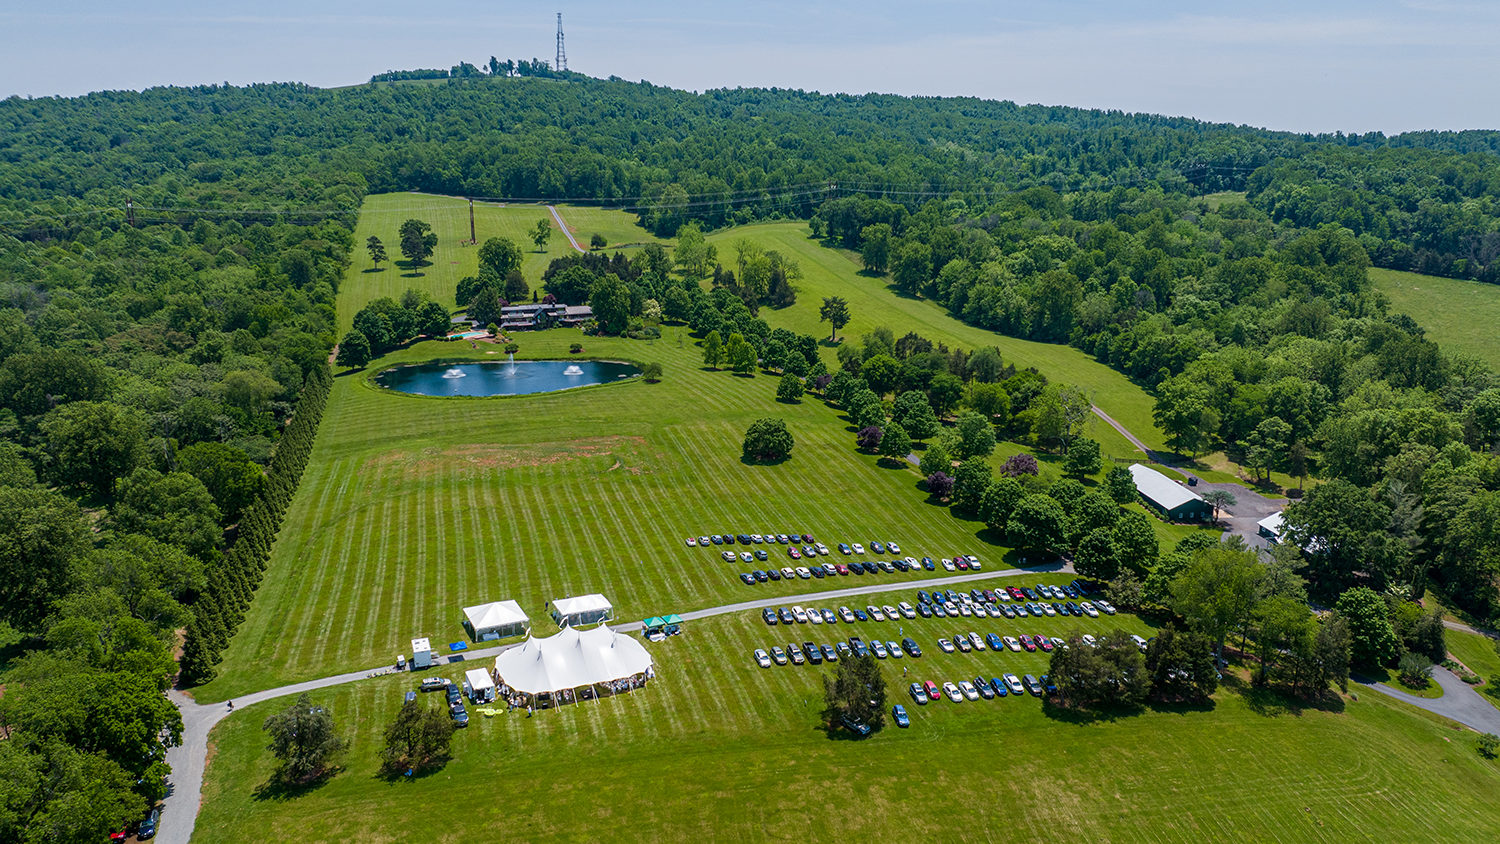 aerial image of a large lawn at the top of a mountain, with an event tent and parked cars